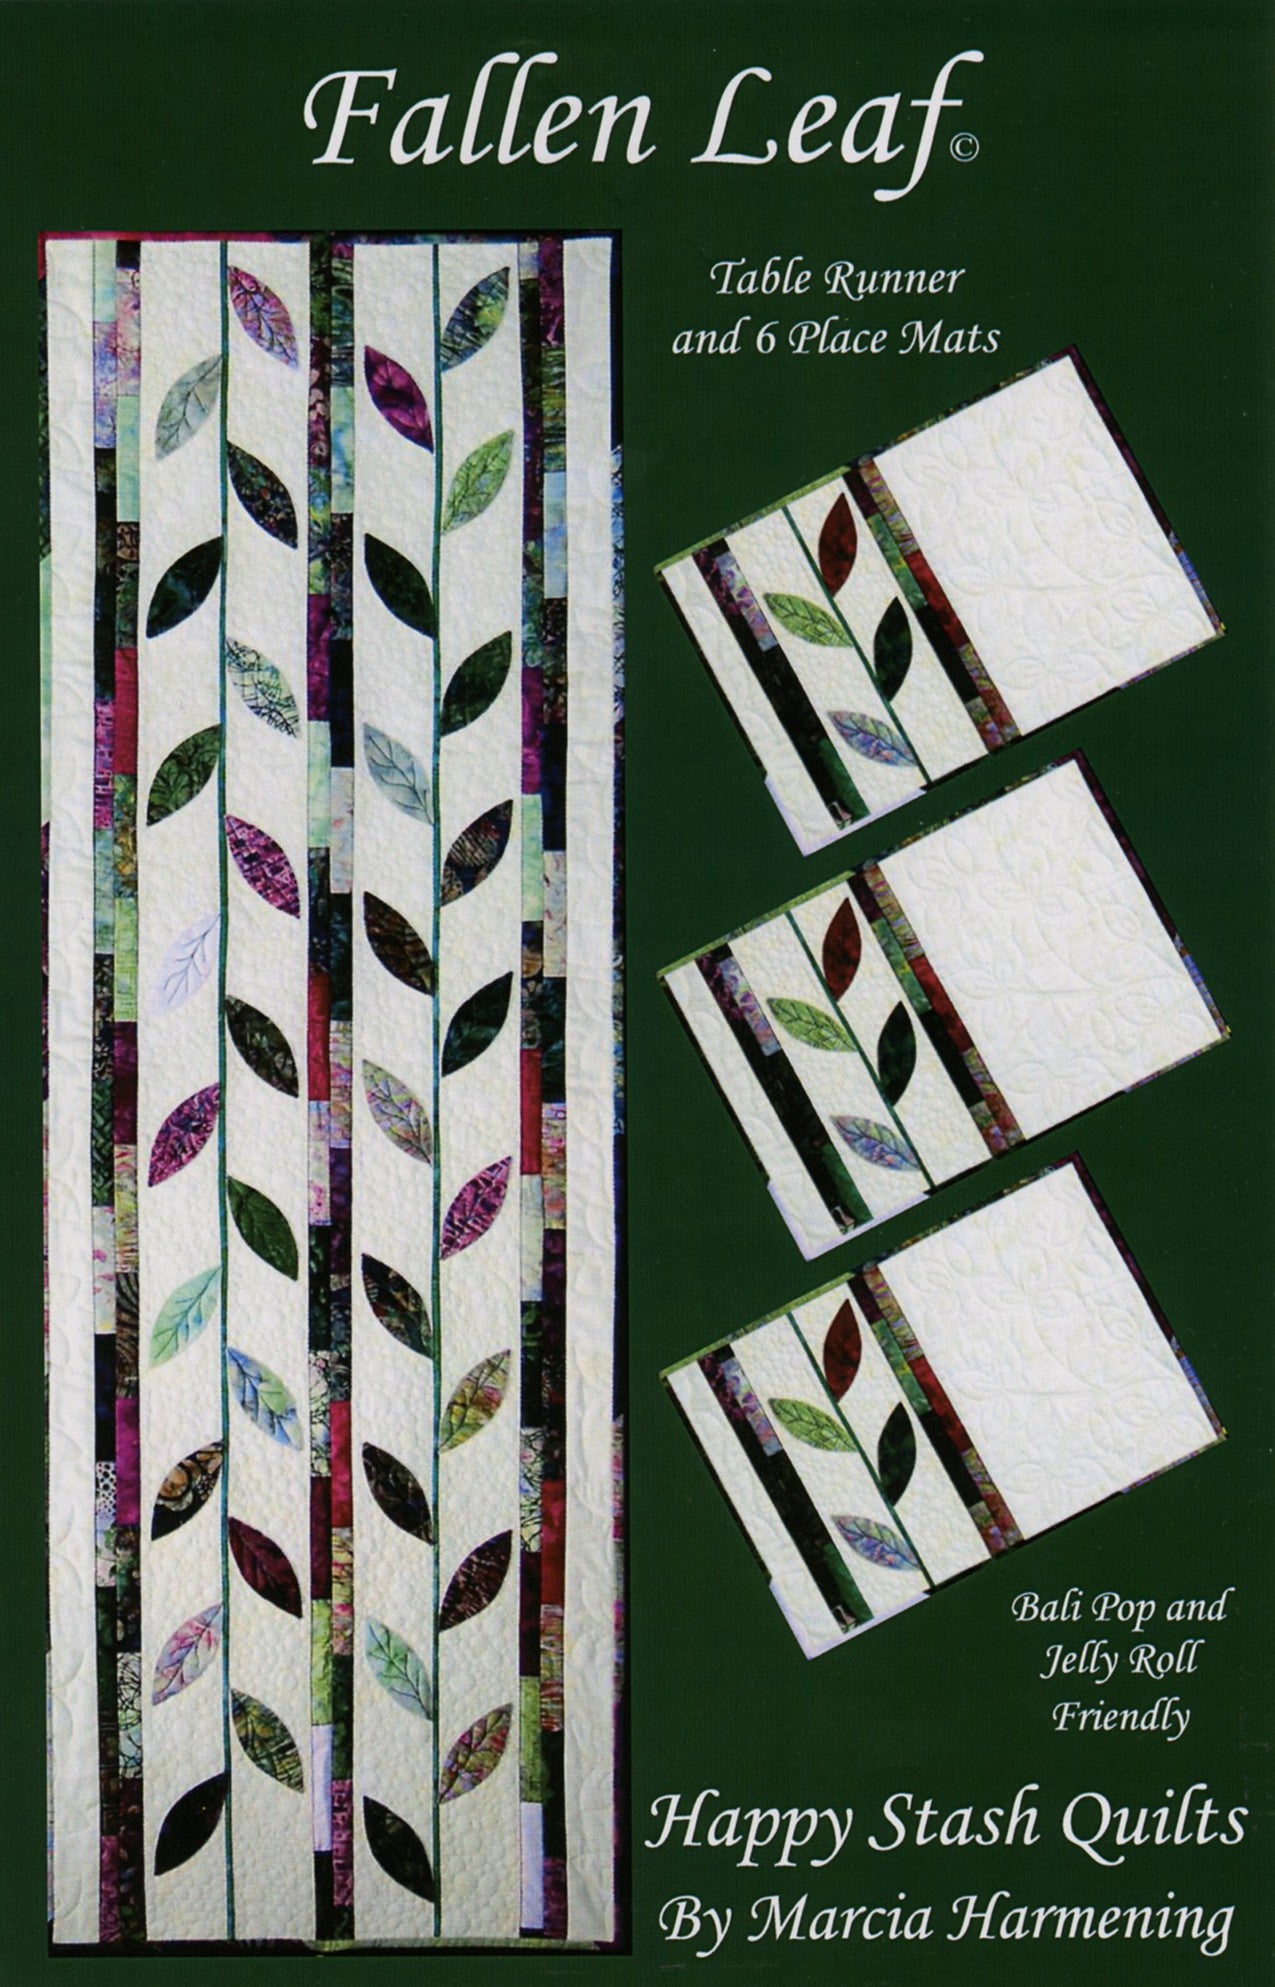 Fallen Leaf Table Runner and Placemats Quilt Pattern by Marcia Harmening for Happy Stash Quilts